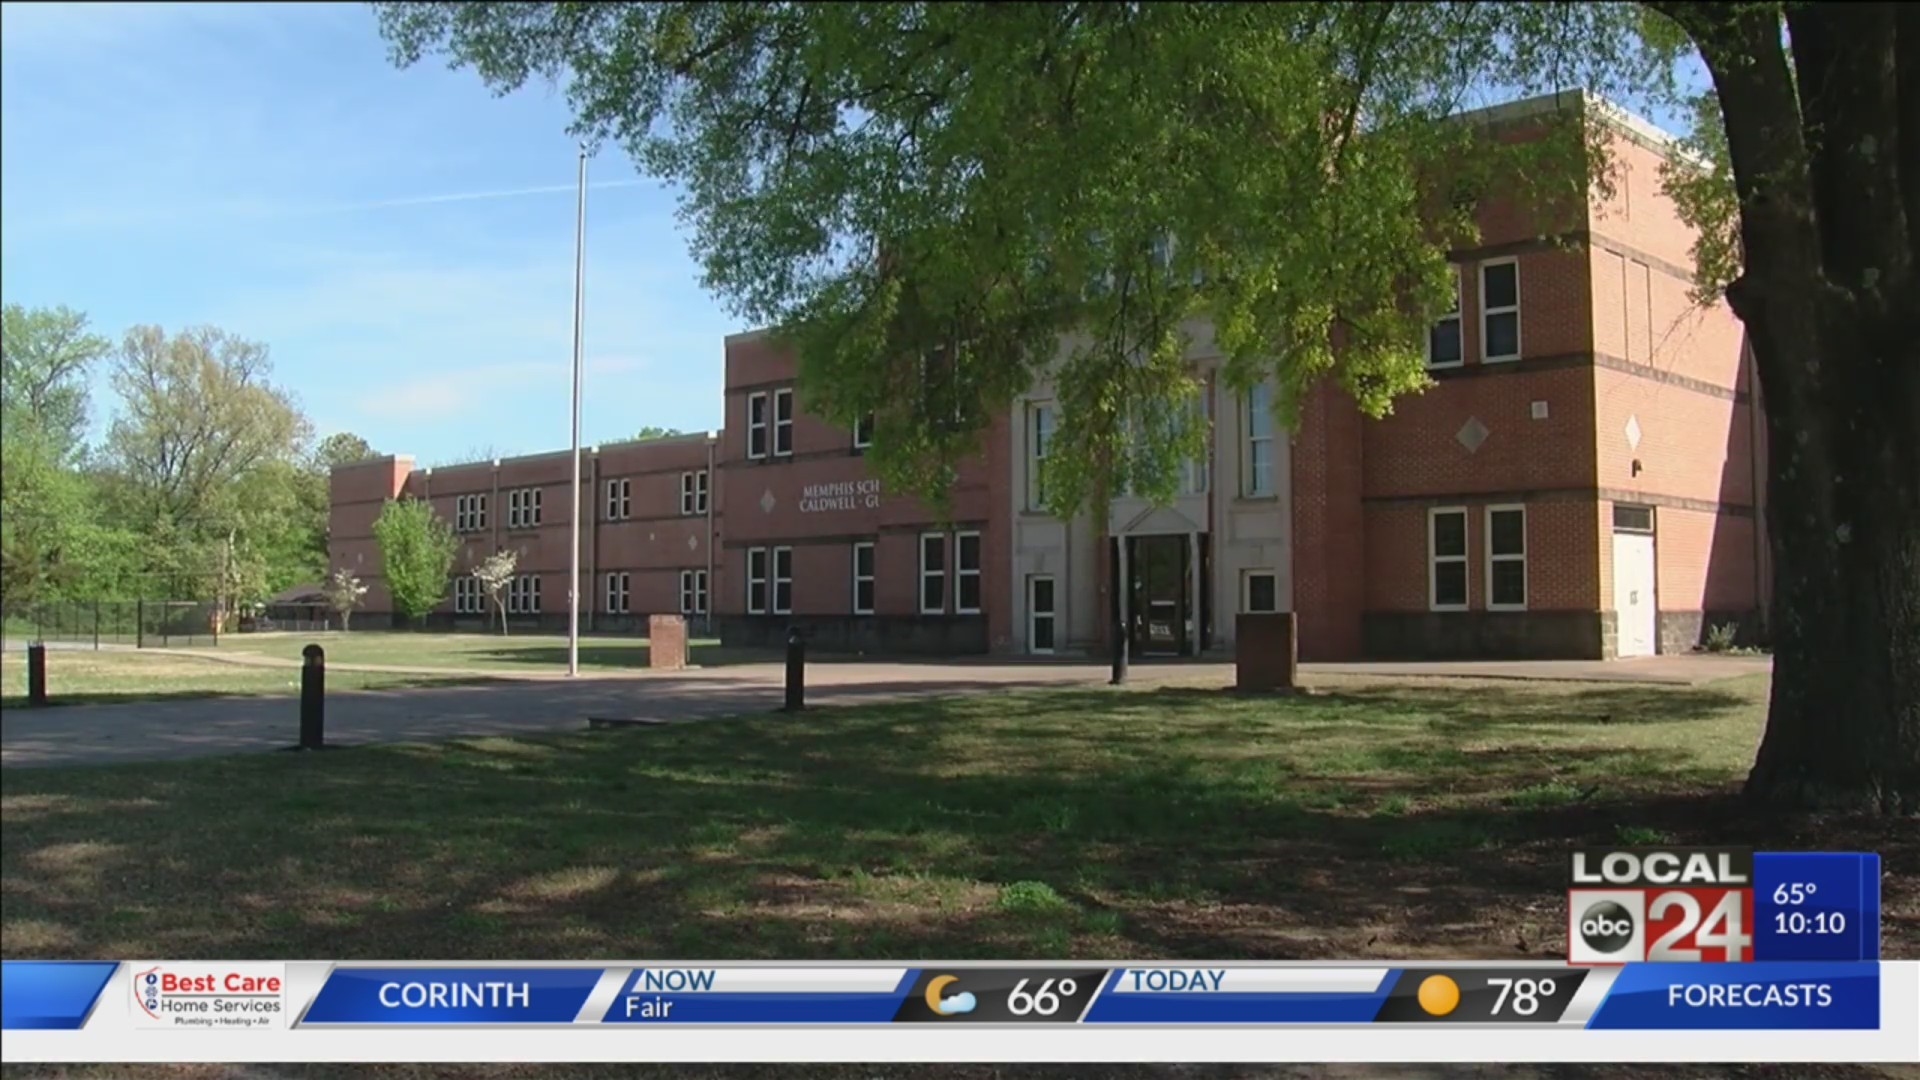 Scabies reported at Memphis elementary school